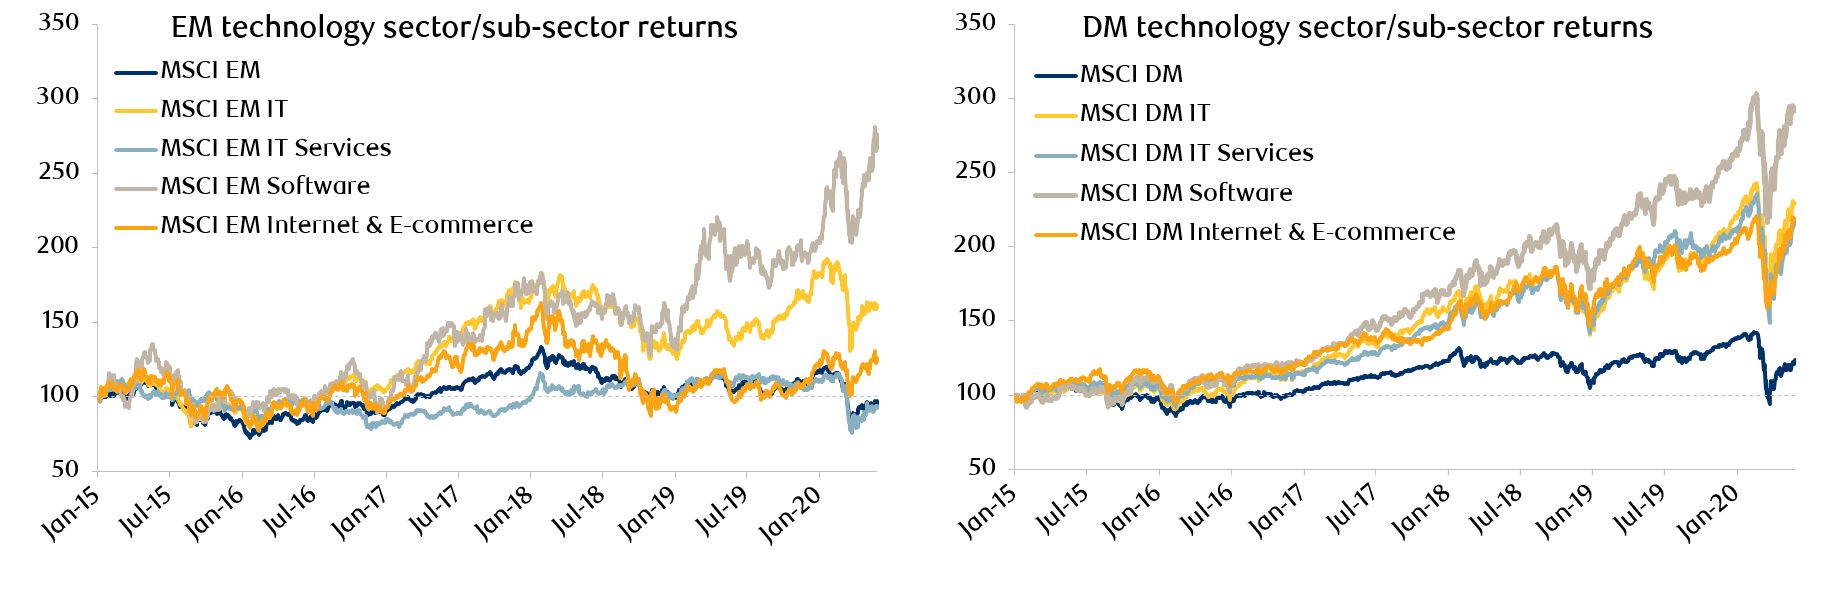 Exhibit 1: The technology sector returns have been much more extreme in DM than EM